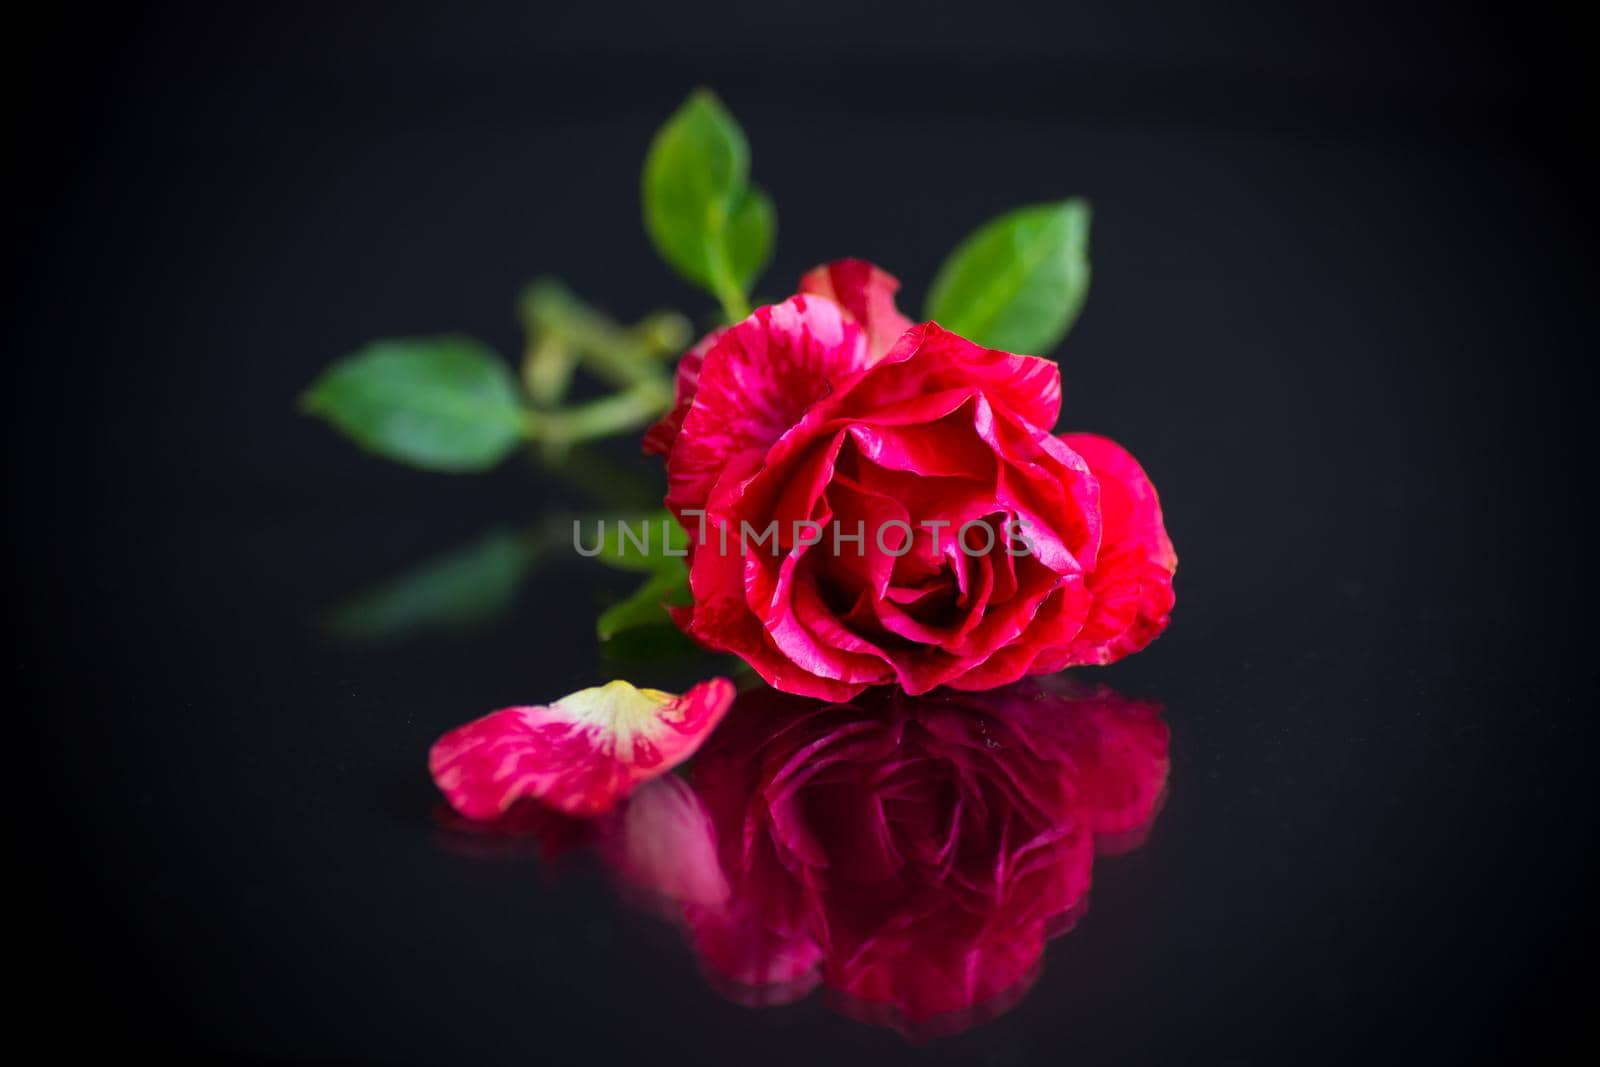 red rose with green leaves. Isolation on a dark background